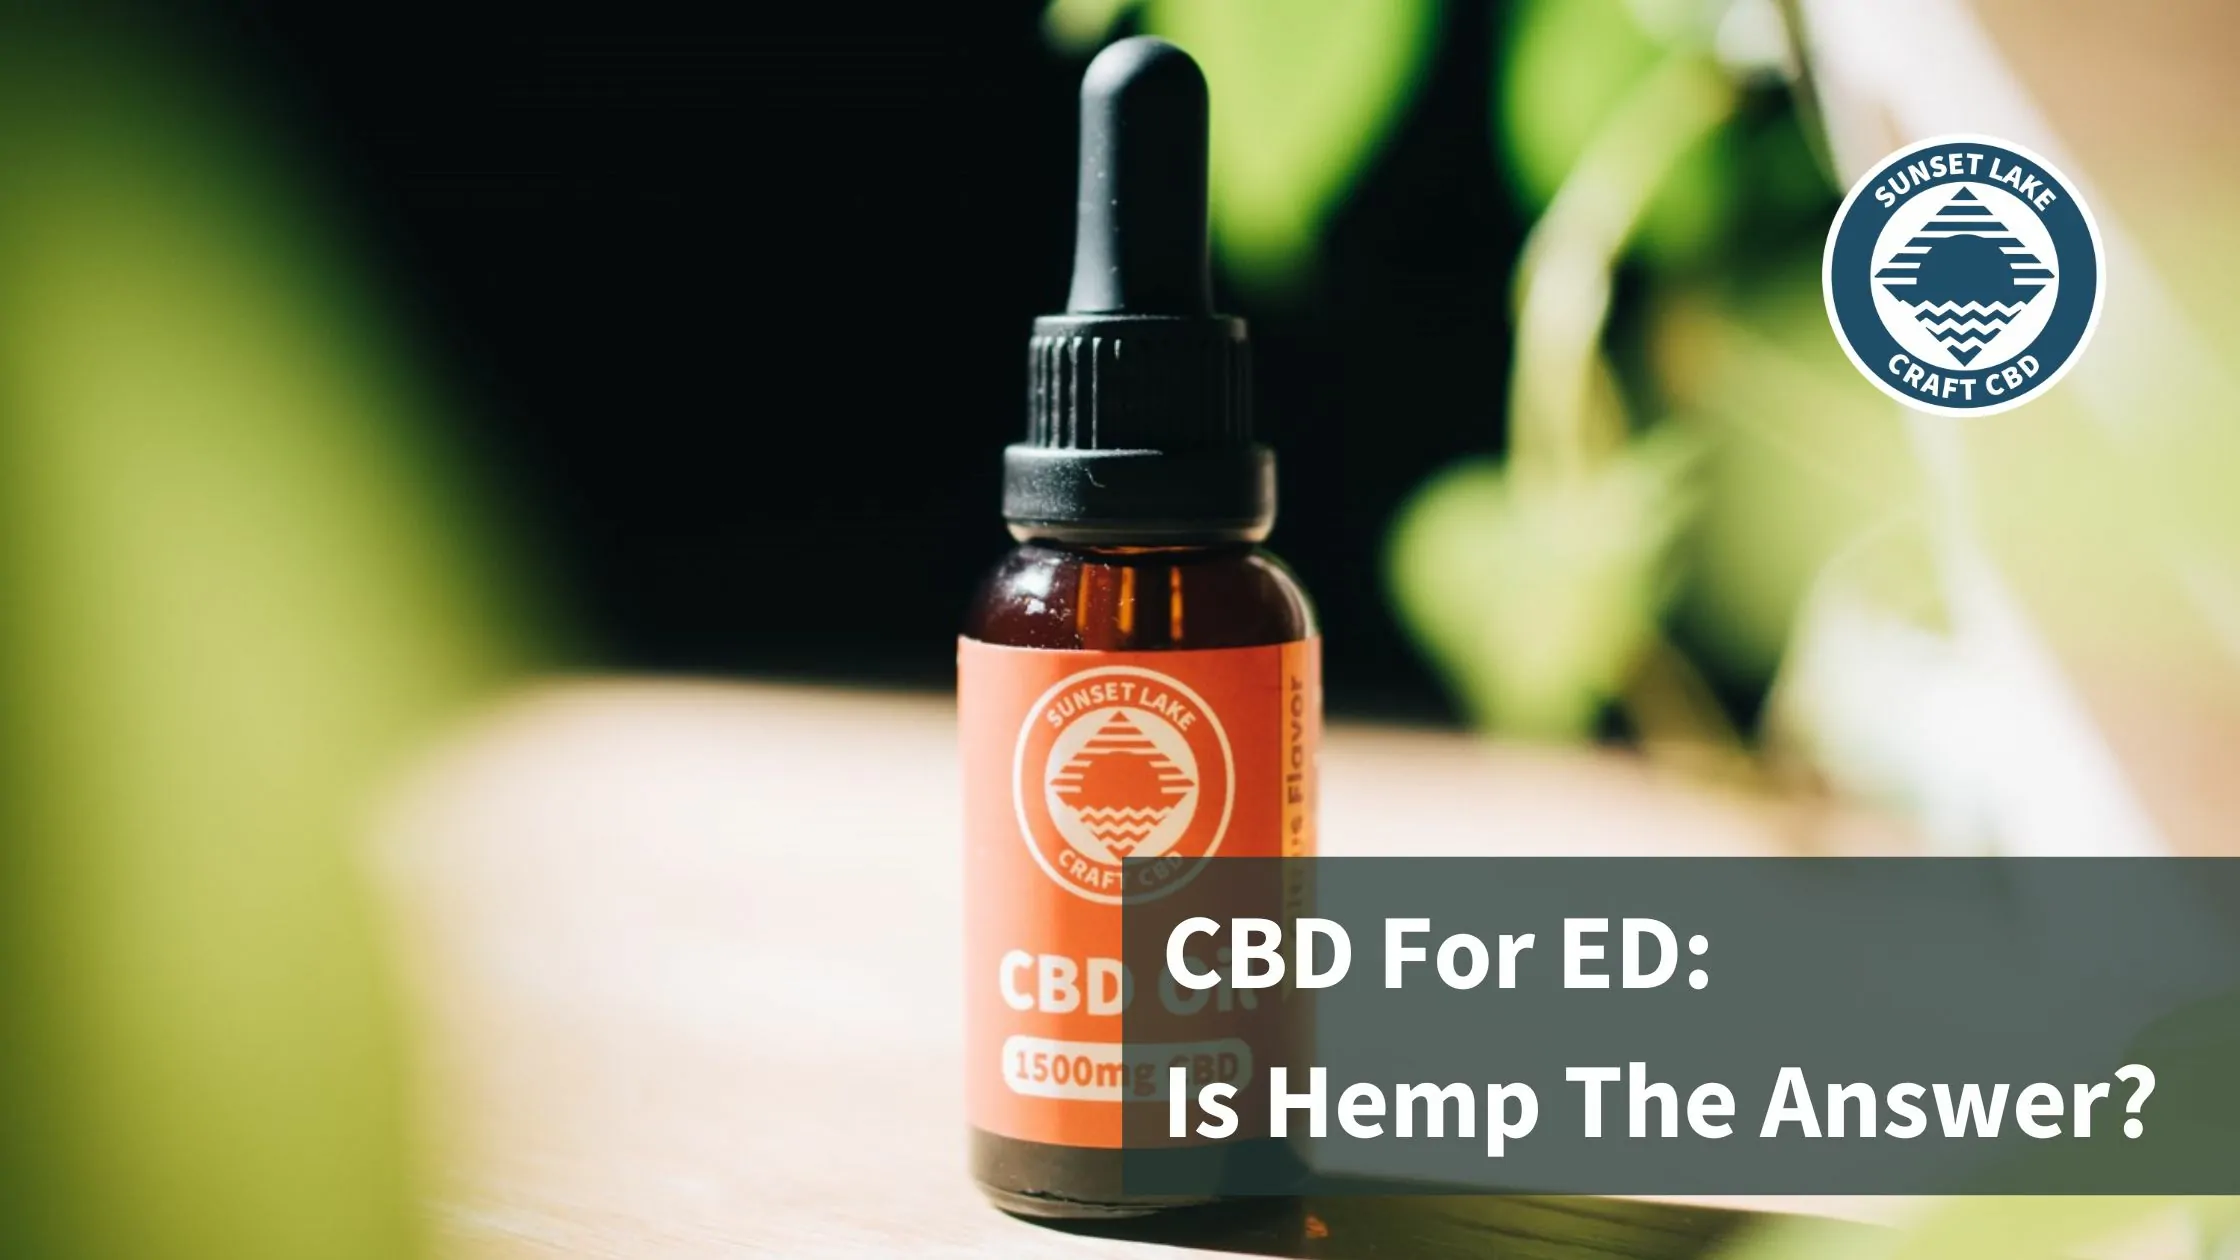 CBD For ED: Is Hemp The Answer For Impotency?